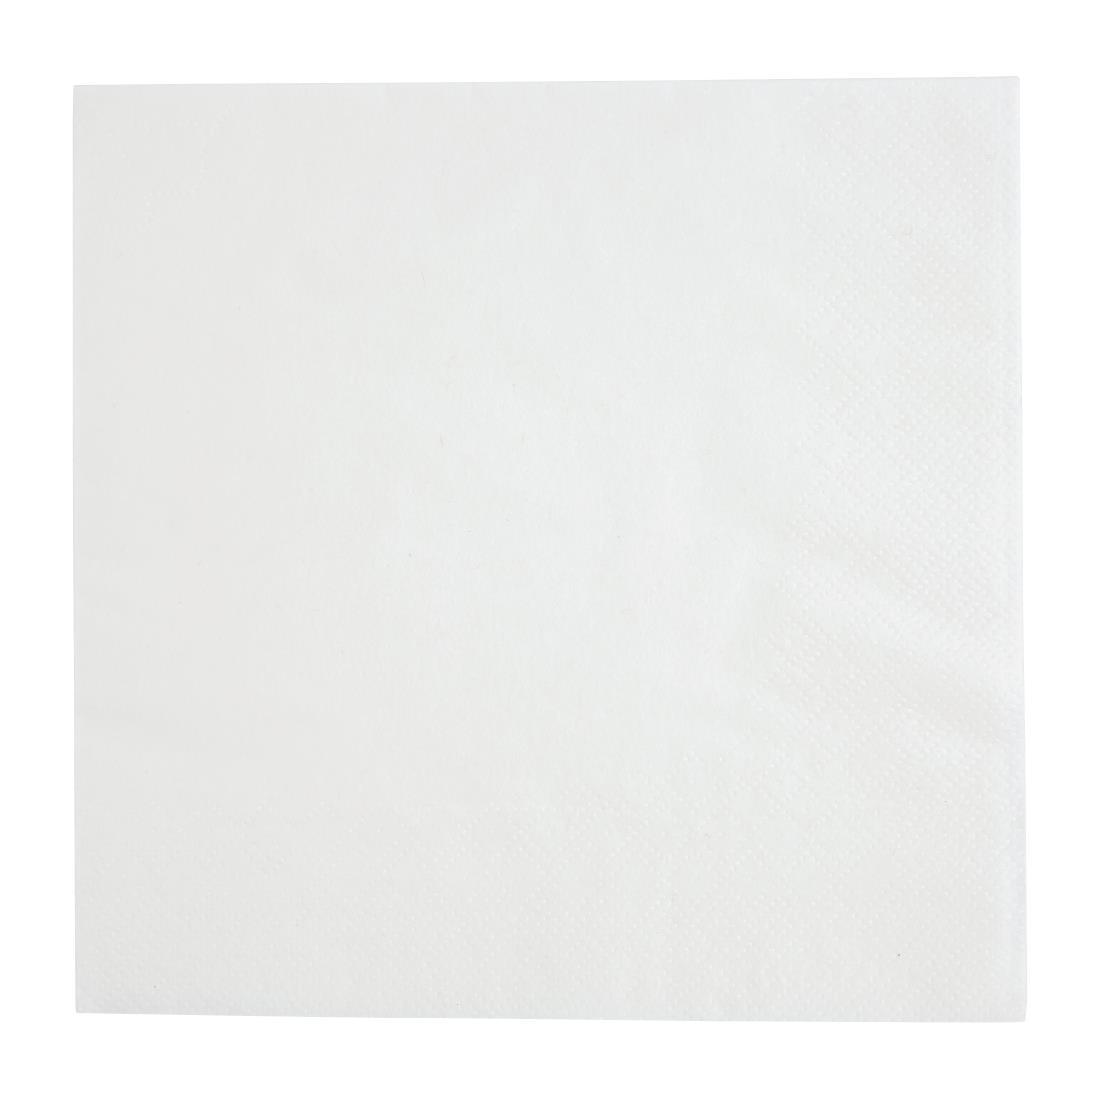 Fiesta Recyclable Lunch Napkin White 33x33cm 2ply 1/4 Fold (Pack of 2000) - FE219  - 2